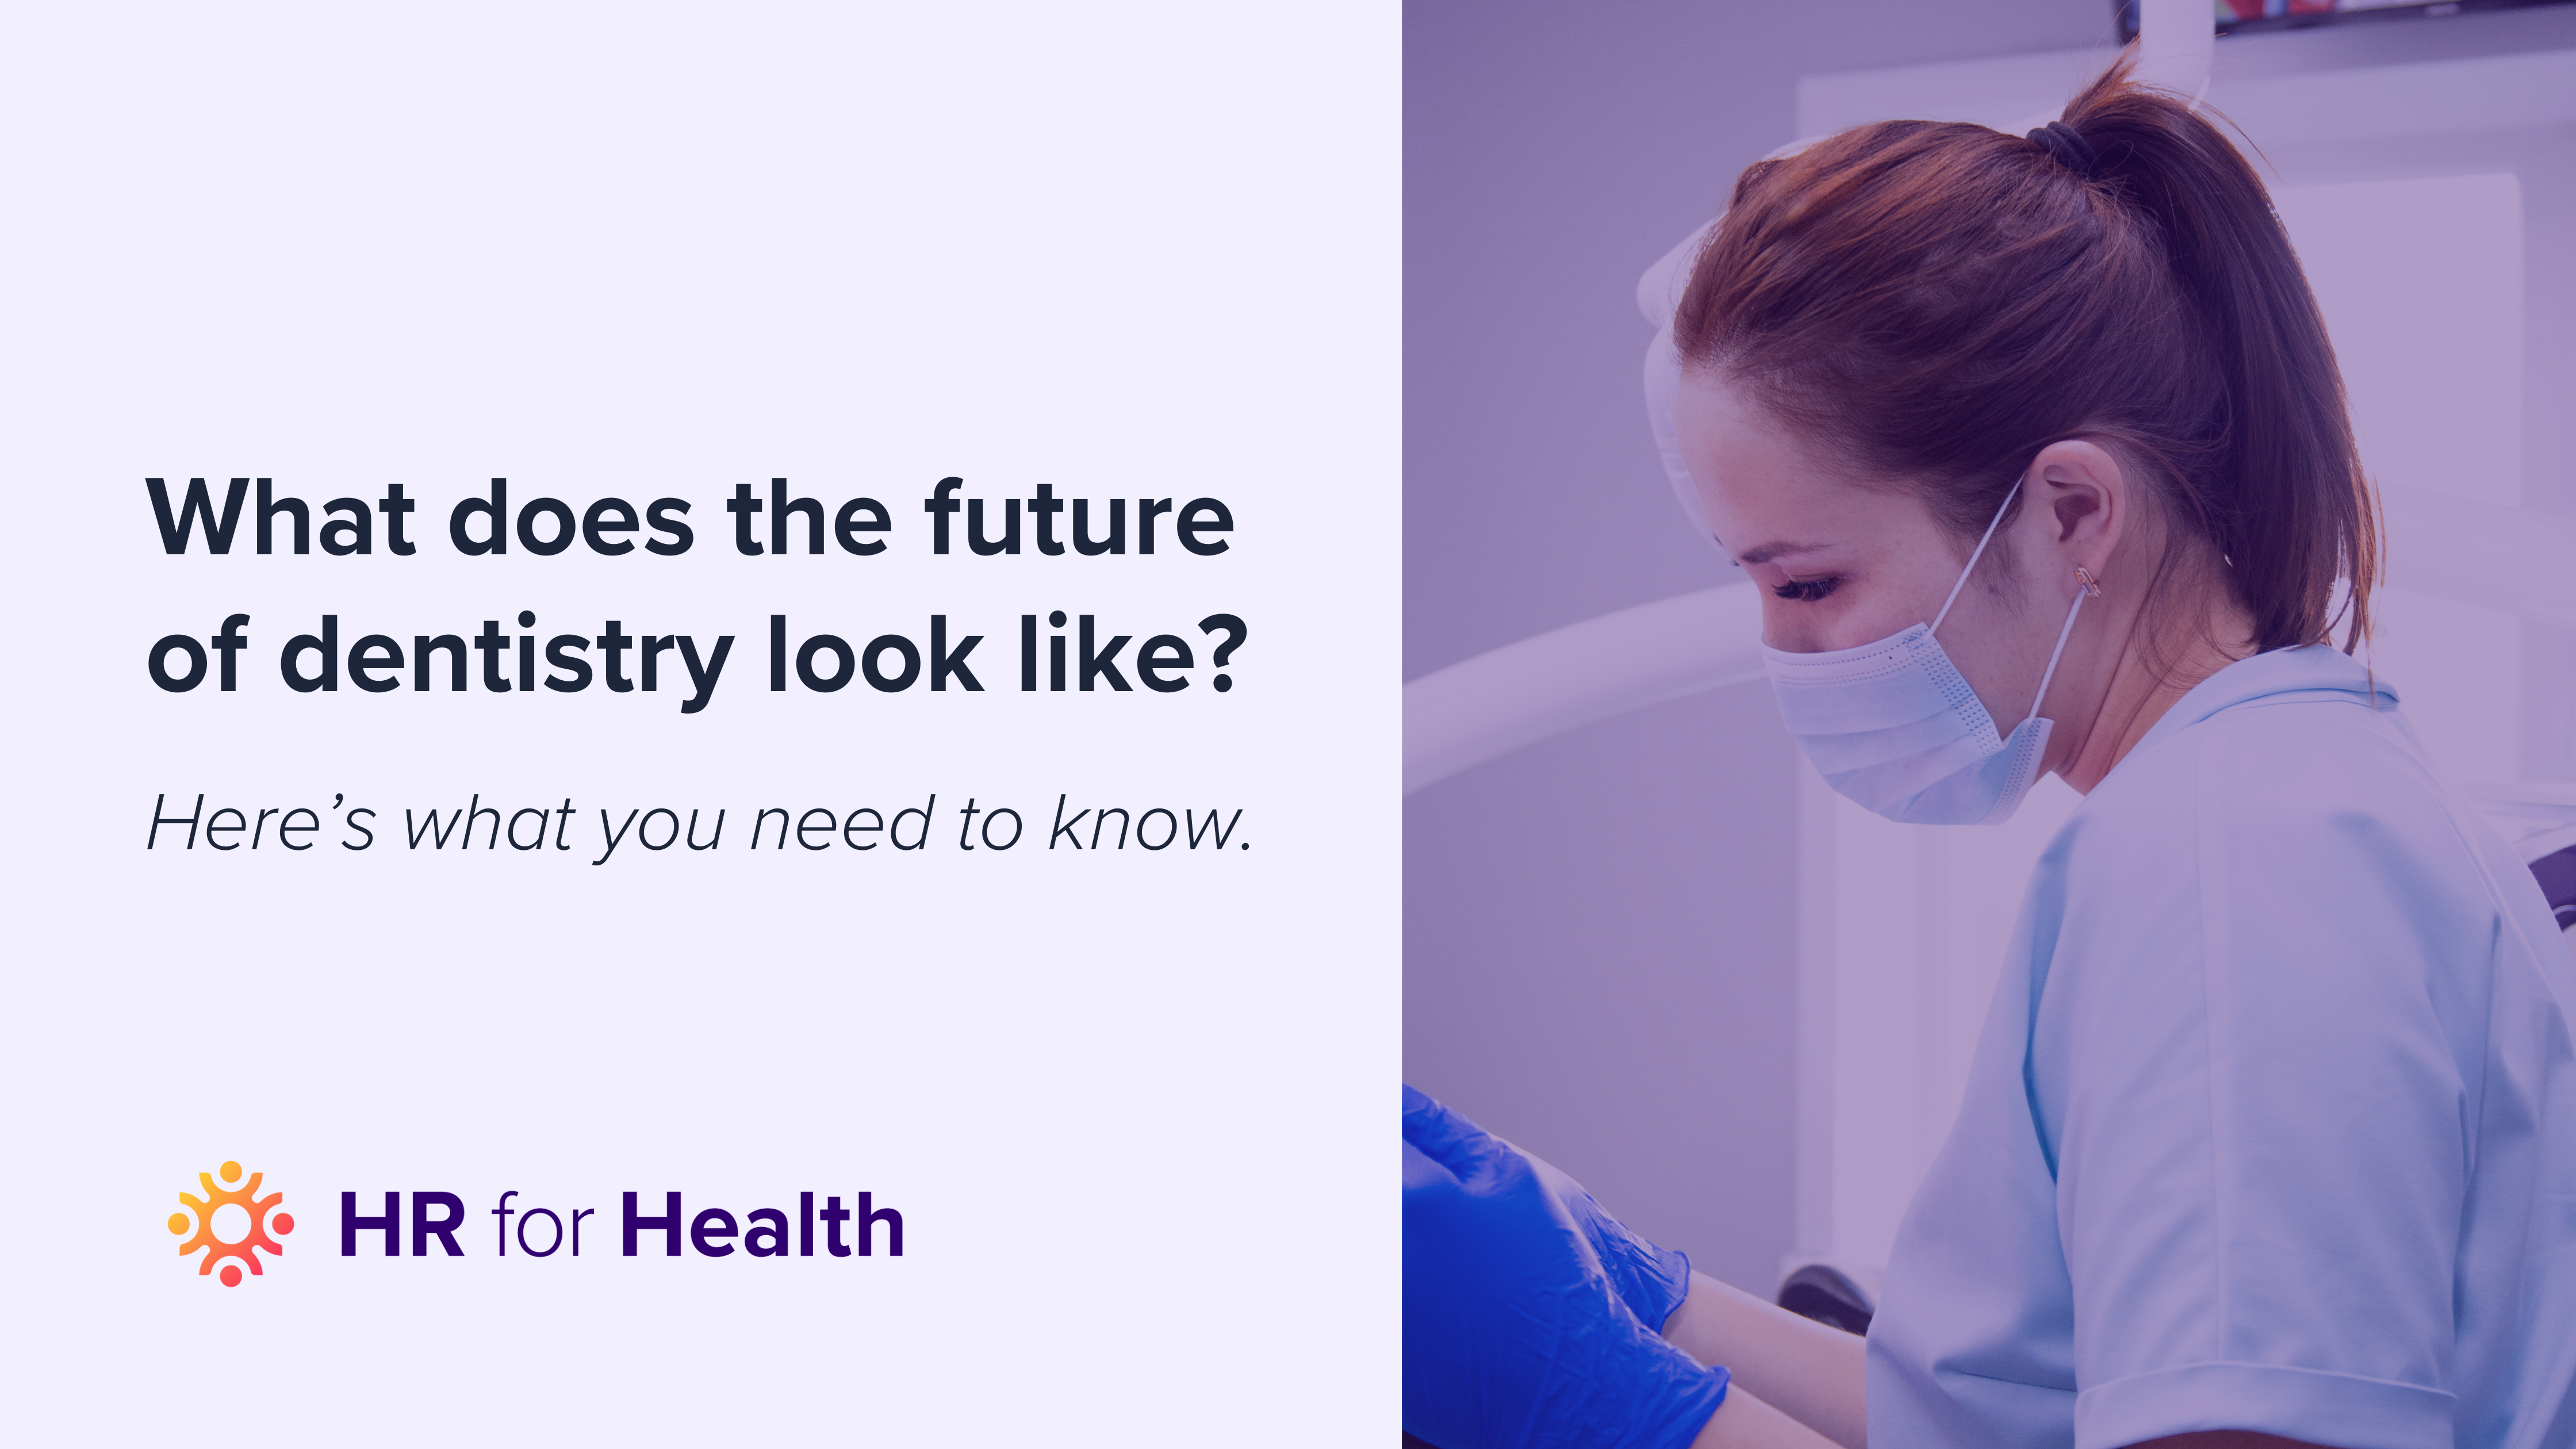 How To Prepare for the Future of Dentistry